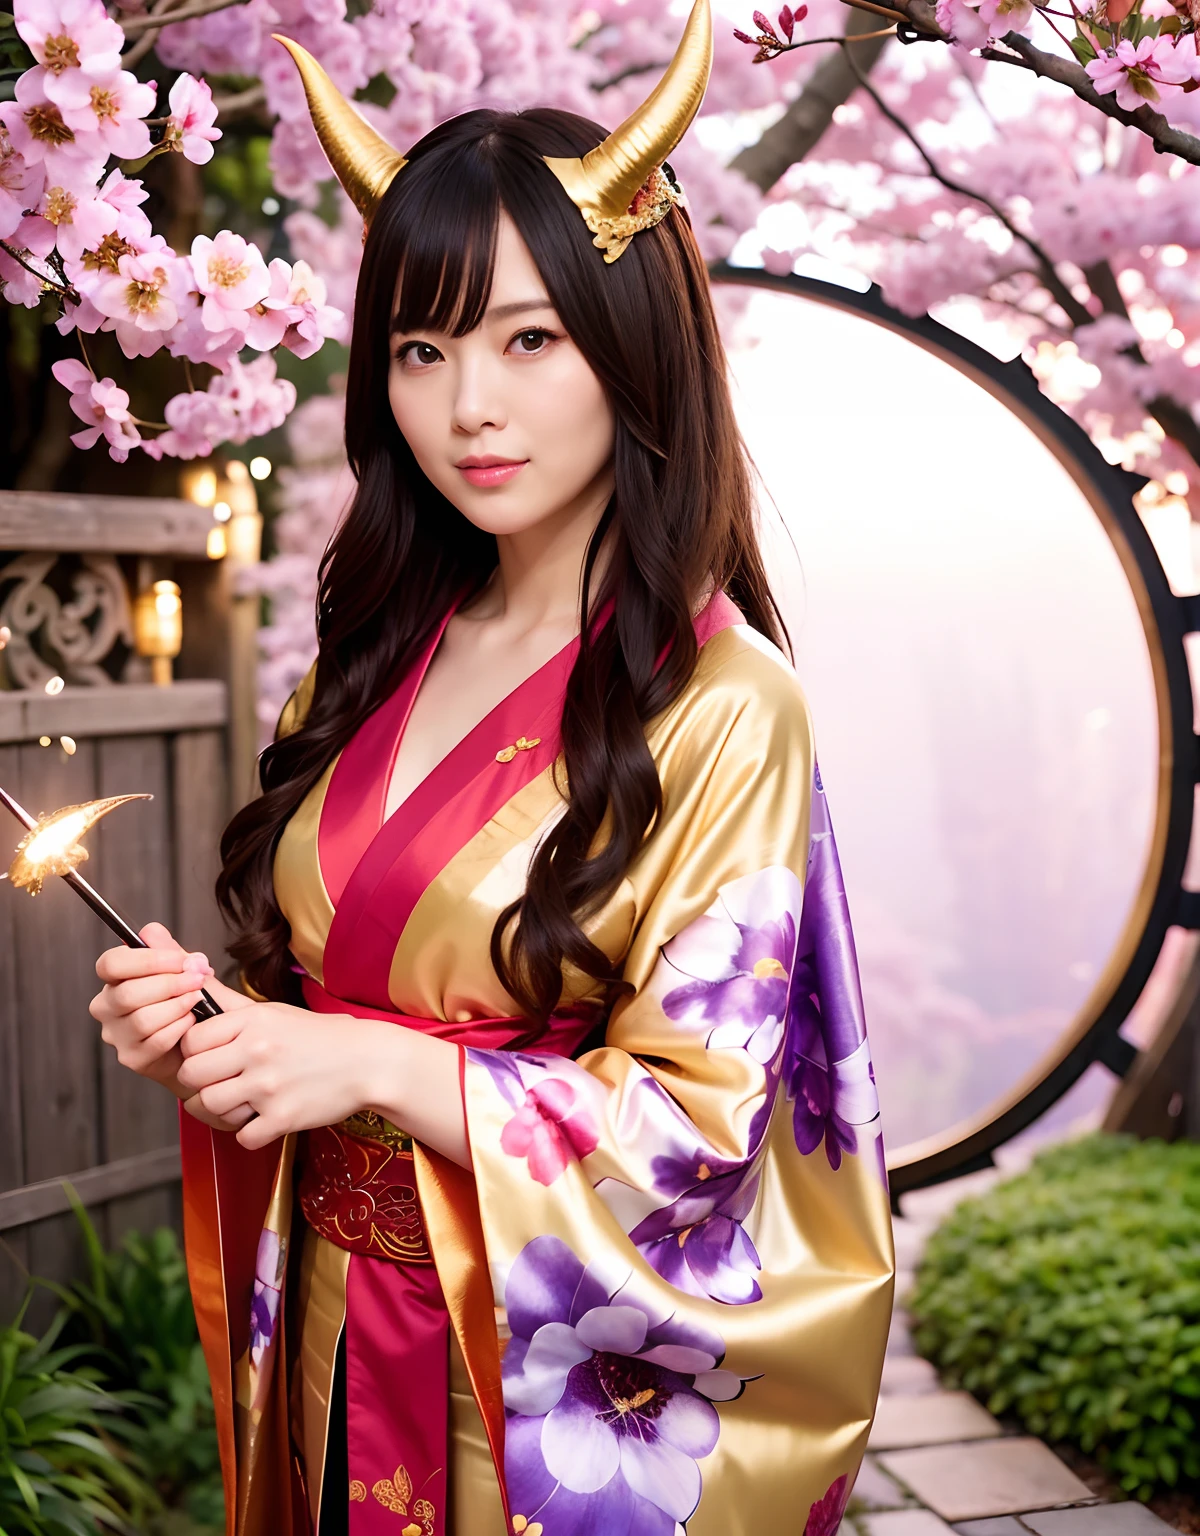 ((World of Darkness)),Professional , ​masterpiece、top-quality、photos realistic , depth of fields 、（sexypose）、(Background of cherry blossoms in full bloom),（Ultimate Beauty）、A dark-haired、（shrine background)、（Kimono with beautiful pattern）、（Night background）、（（Precipitous cliffs））,(Wear a beautiful kimono),（Wear a beautiful kimono with colorful floral patterns）、Jewel Gold Weapon、Particles of light),(Wearing a wizard's hat）、Gorgeous gold weapons ,Castle background、（（ Gorgeous Dragon Sword）） , （a dark night）,,（maikurobikini） 、（（Black Haired Beautiful Girl））、（Castle background）、（demonic wings）、（（Gangle's forest background））、Beautiful Caucasian beauty、１a person、dynamic ungle,(((Two devil's horns on the head)))、Smaller head、Idle Smile、Thin and beautiful female handystical expression、Light Effects、intense fighting、Wind-effect、magic circles、With the legendary magic wand、Dragon's tail、